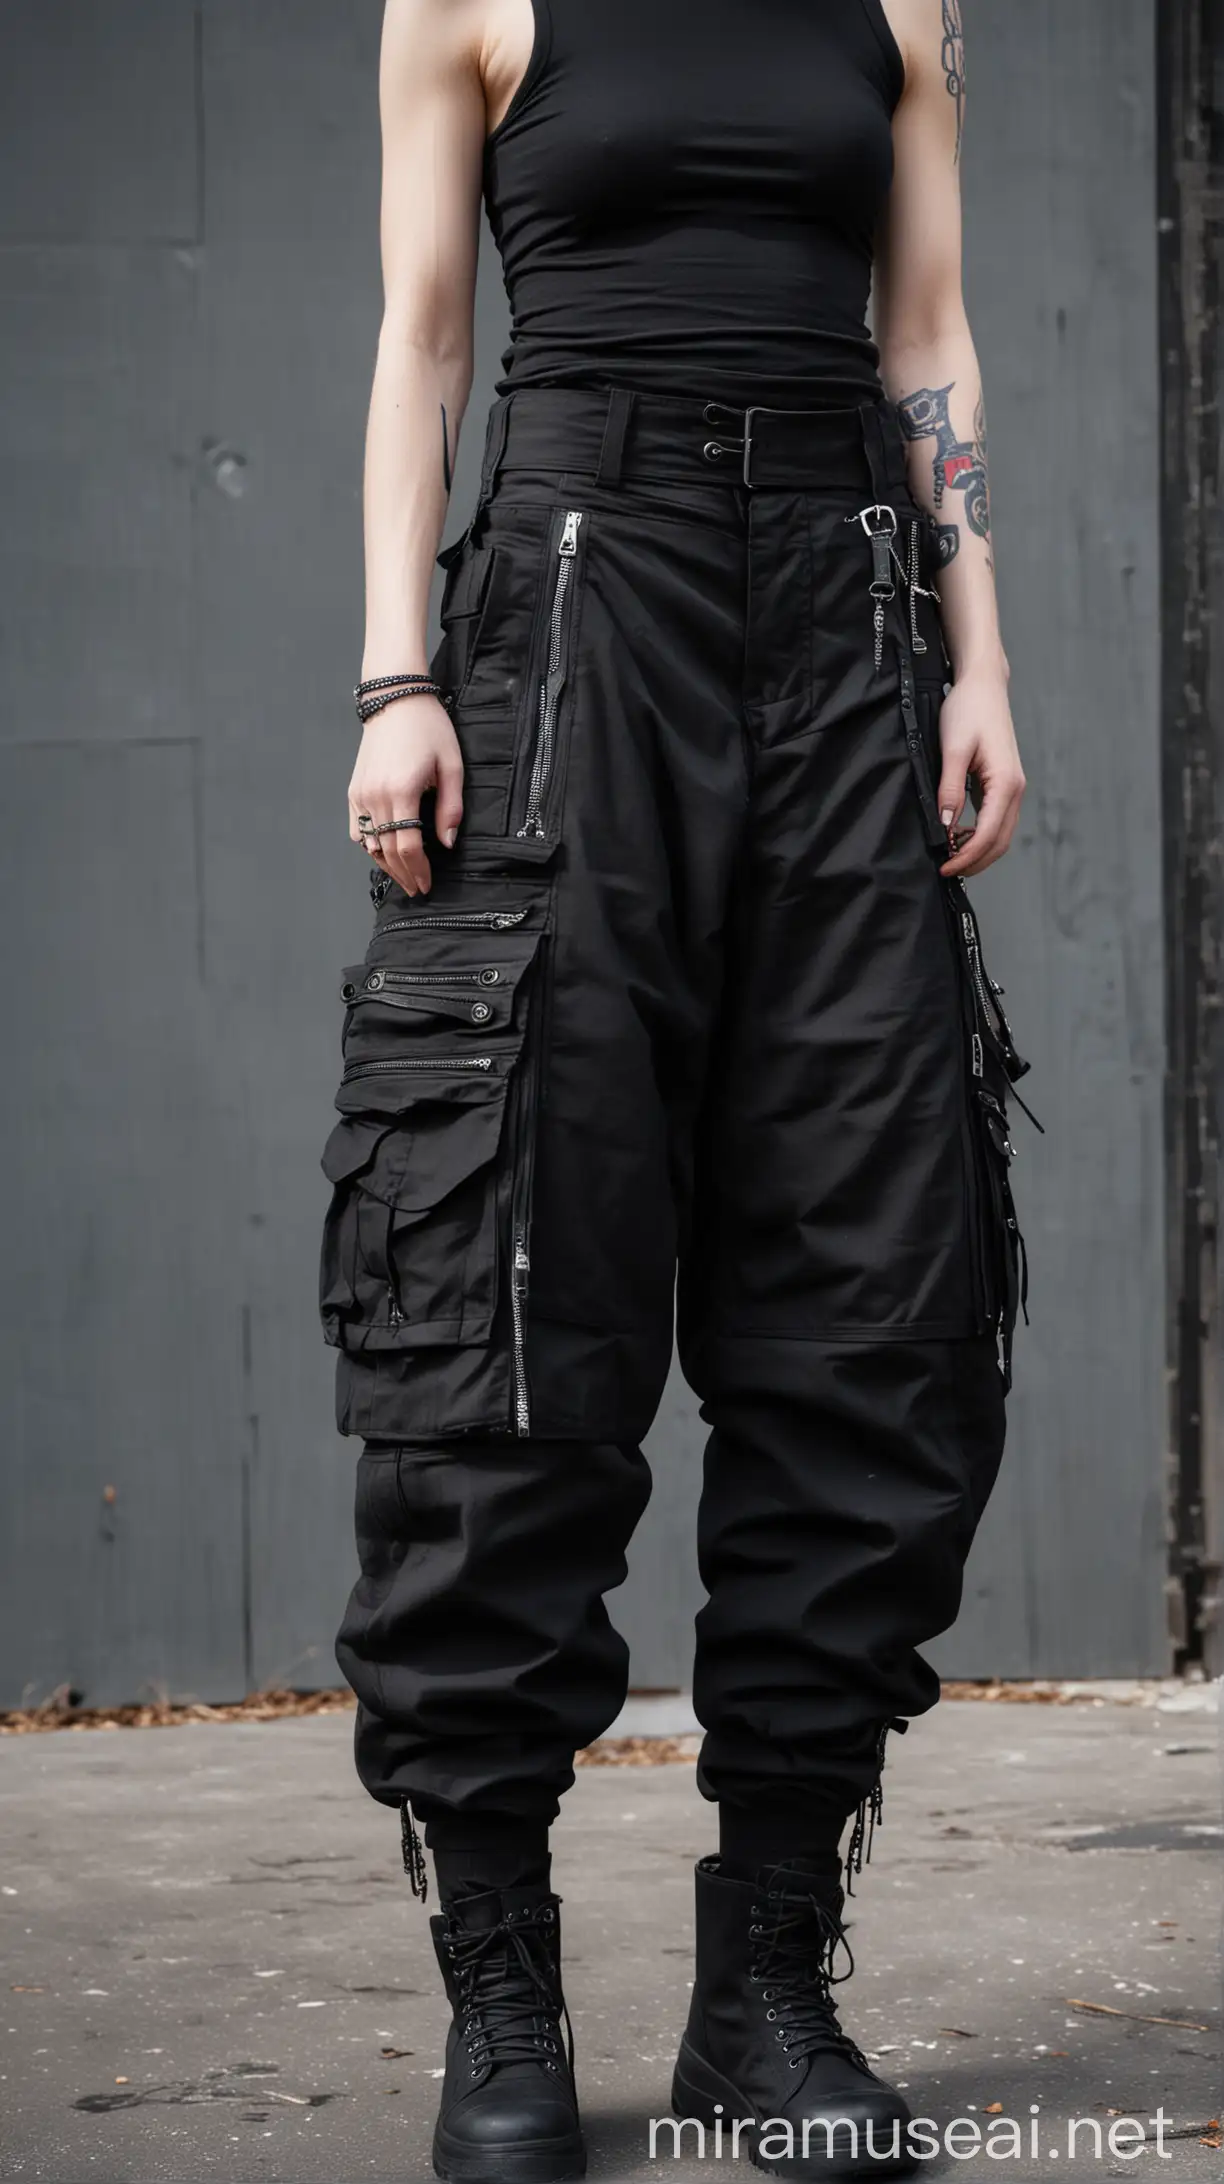 a close up of a pair of black cargo pants with zippers, cargo pants. cyberpunk city, cargo pants, baggy black pants, wide leg hakama trousers, goth punk clothes, covert military pants, military pants, acronym p31-ds pants, steelpunk, wearing cargo pants, rick owens, high waist sweatpants, cybergoth, many zippers